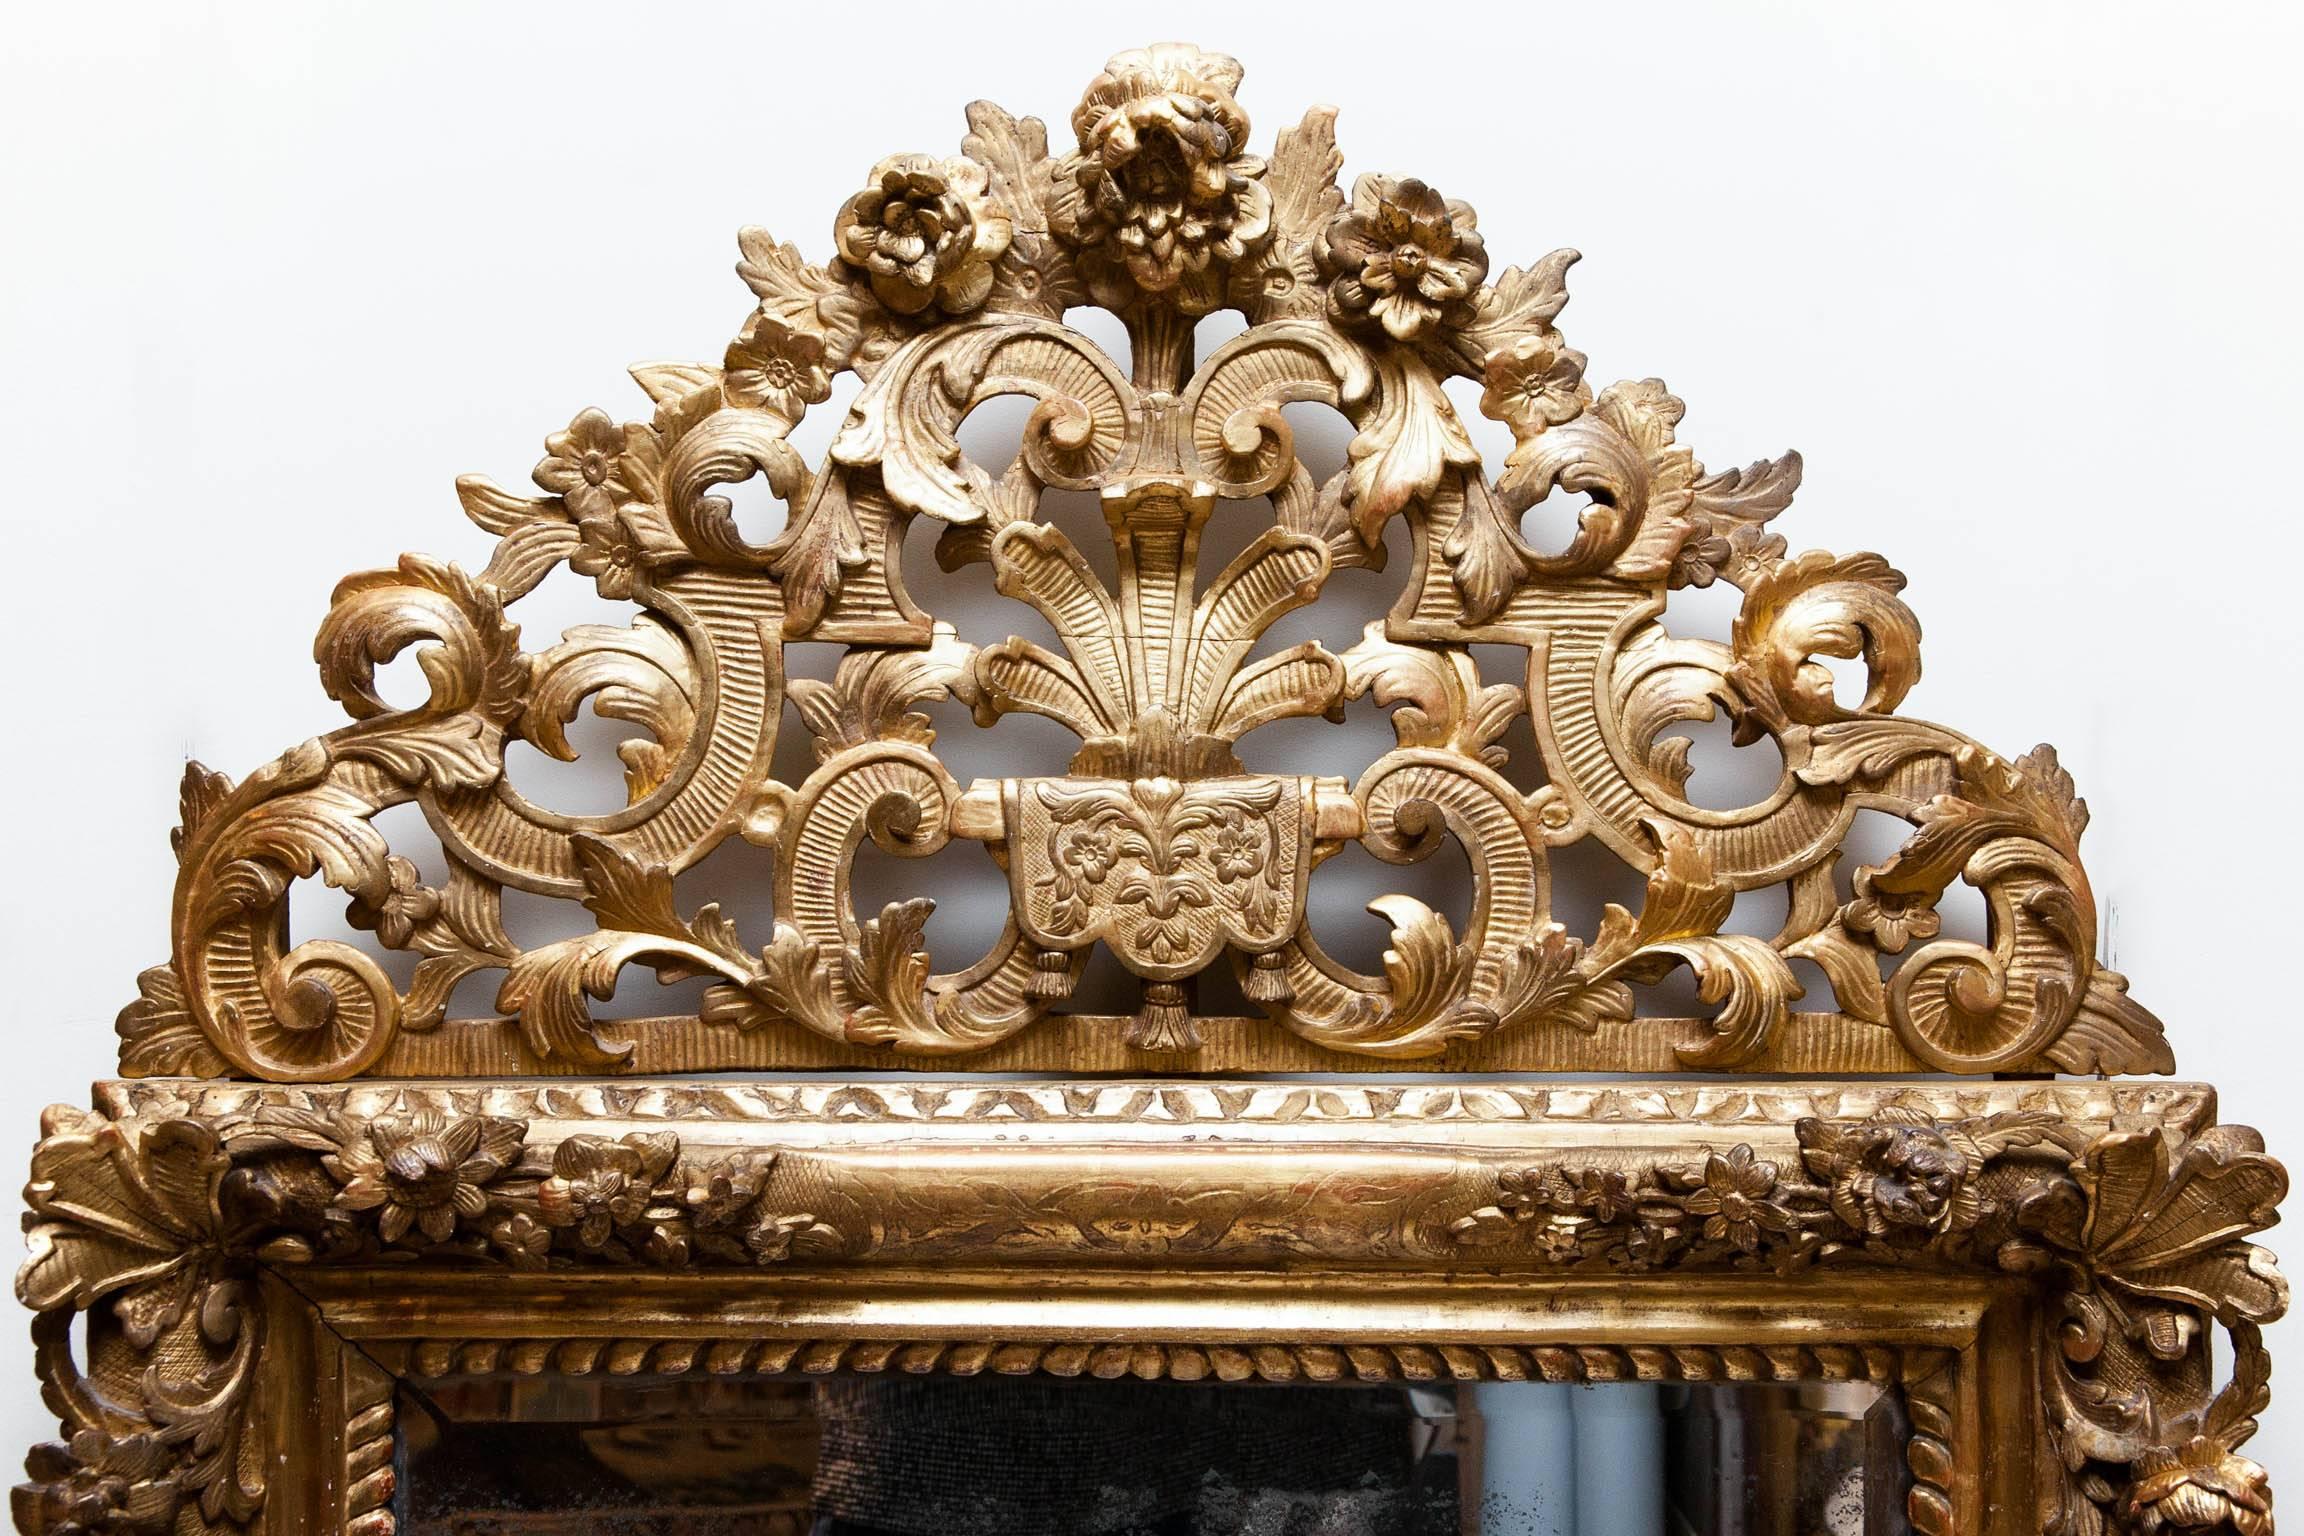 18th century giltwood mirror with detachable top. With carved flowers, garlands and beading to the inner edge of the frame.
Beveled mercury glass plate, France, circa 1750.

We are members of LAPADA and CINOA.